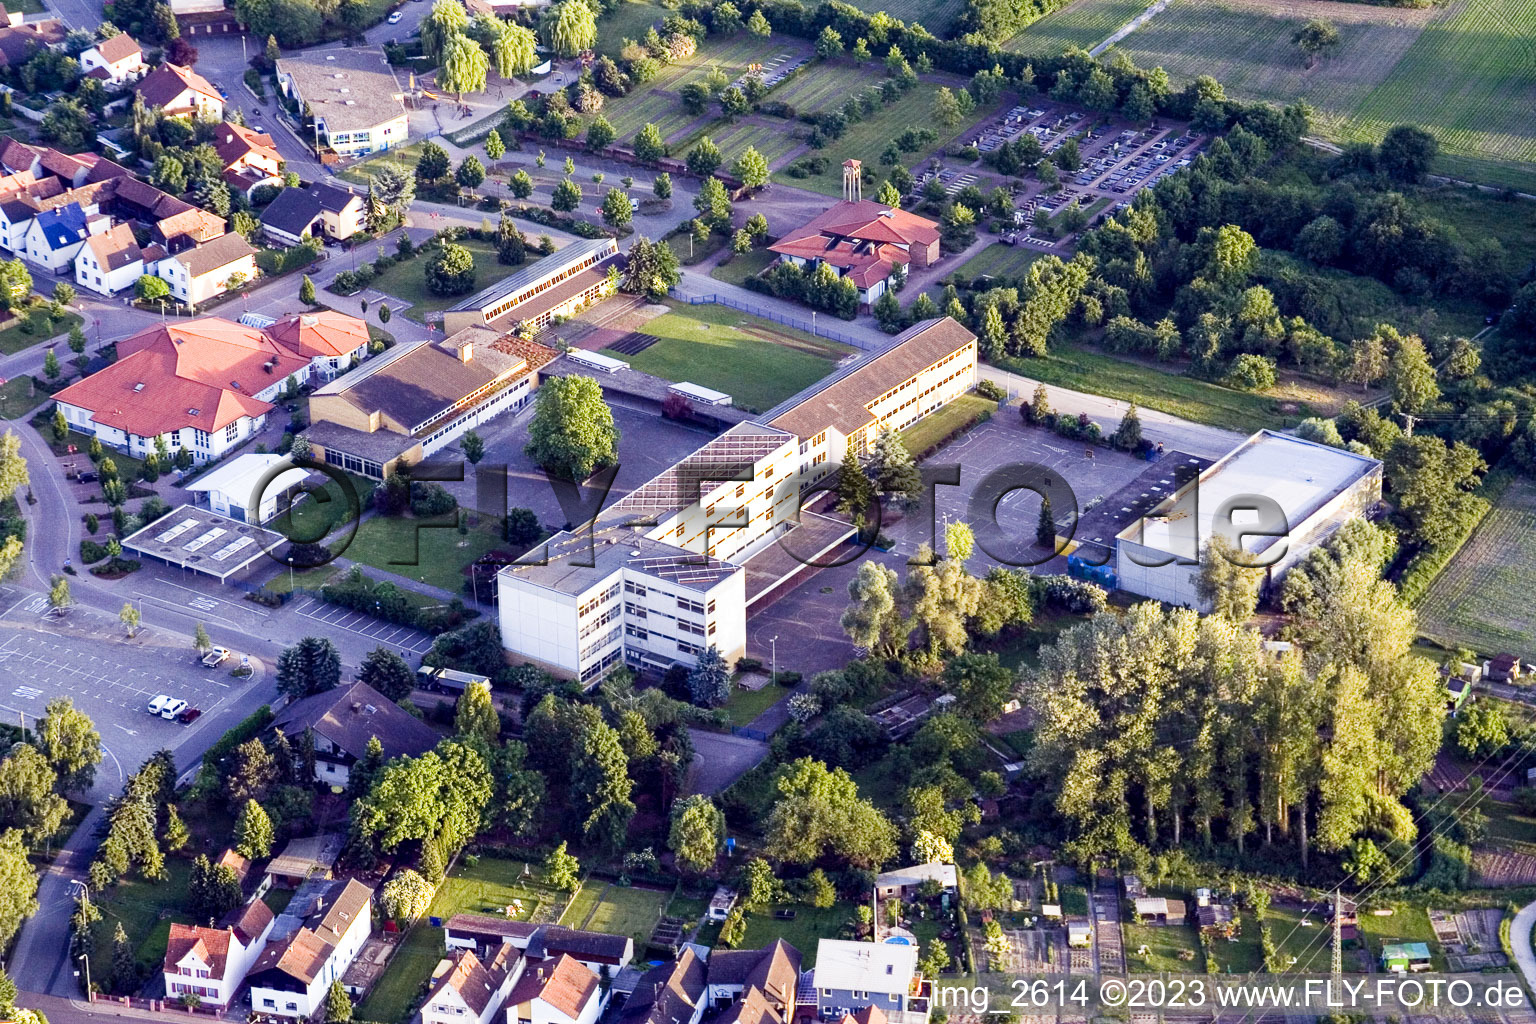 Aerial view of School center in Hagenbach in the state Rhineland-Palatinate, Germany